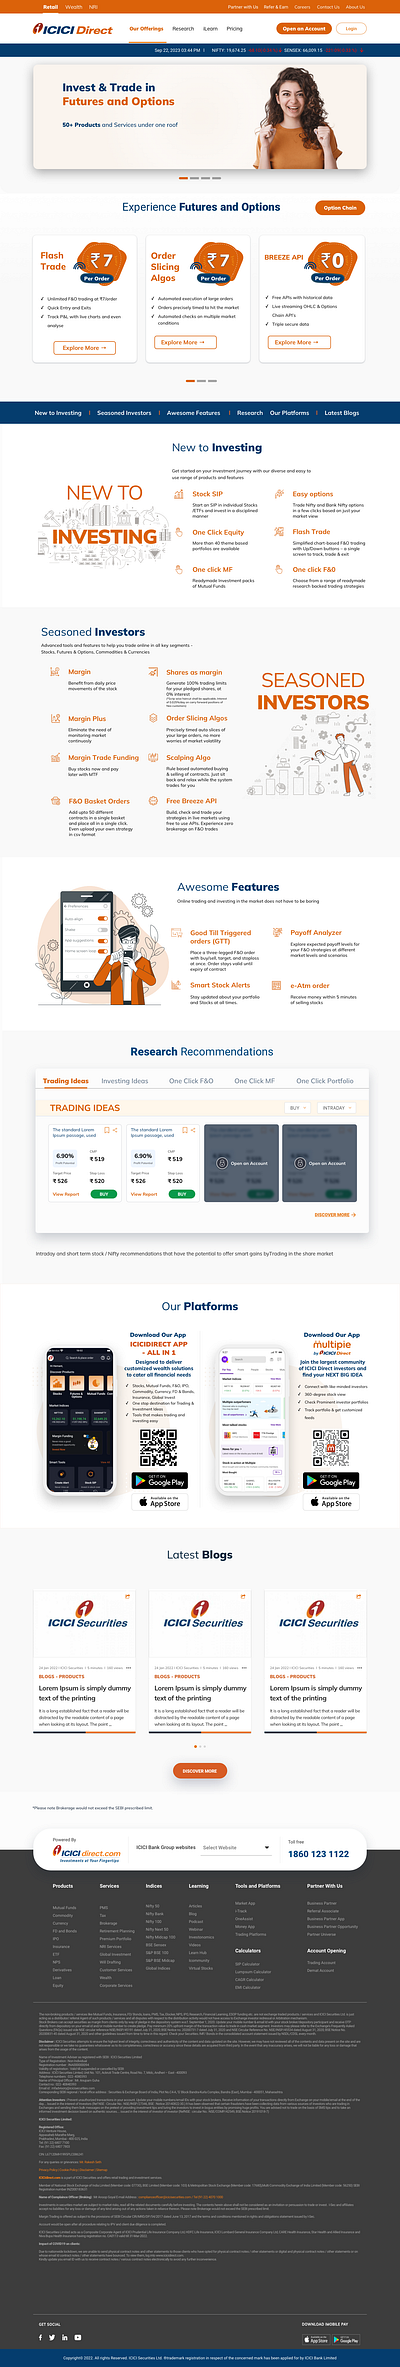 ICICI Direct Home Page F&O Customer home page landing page ui user interface design